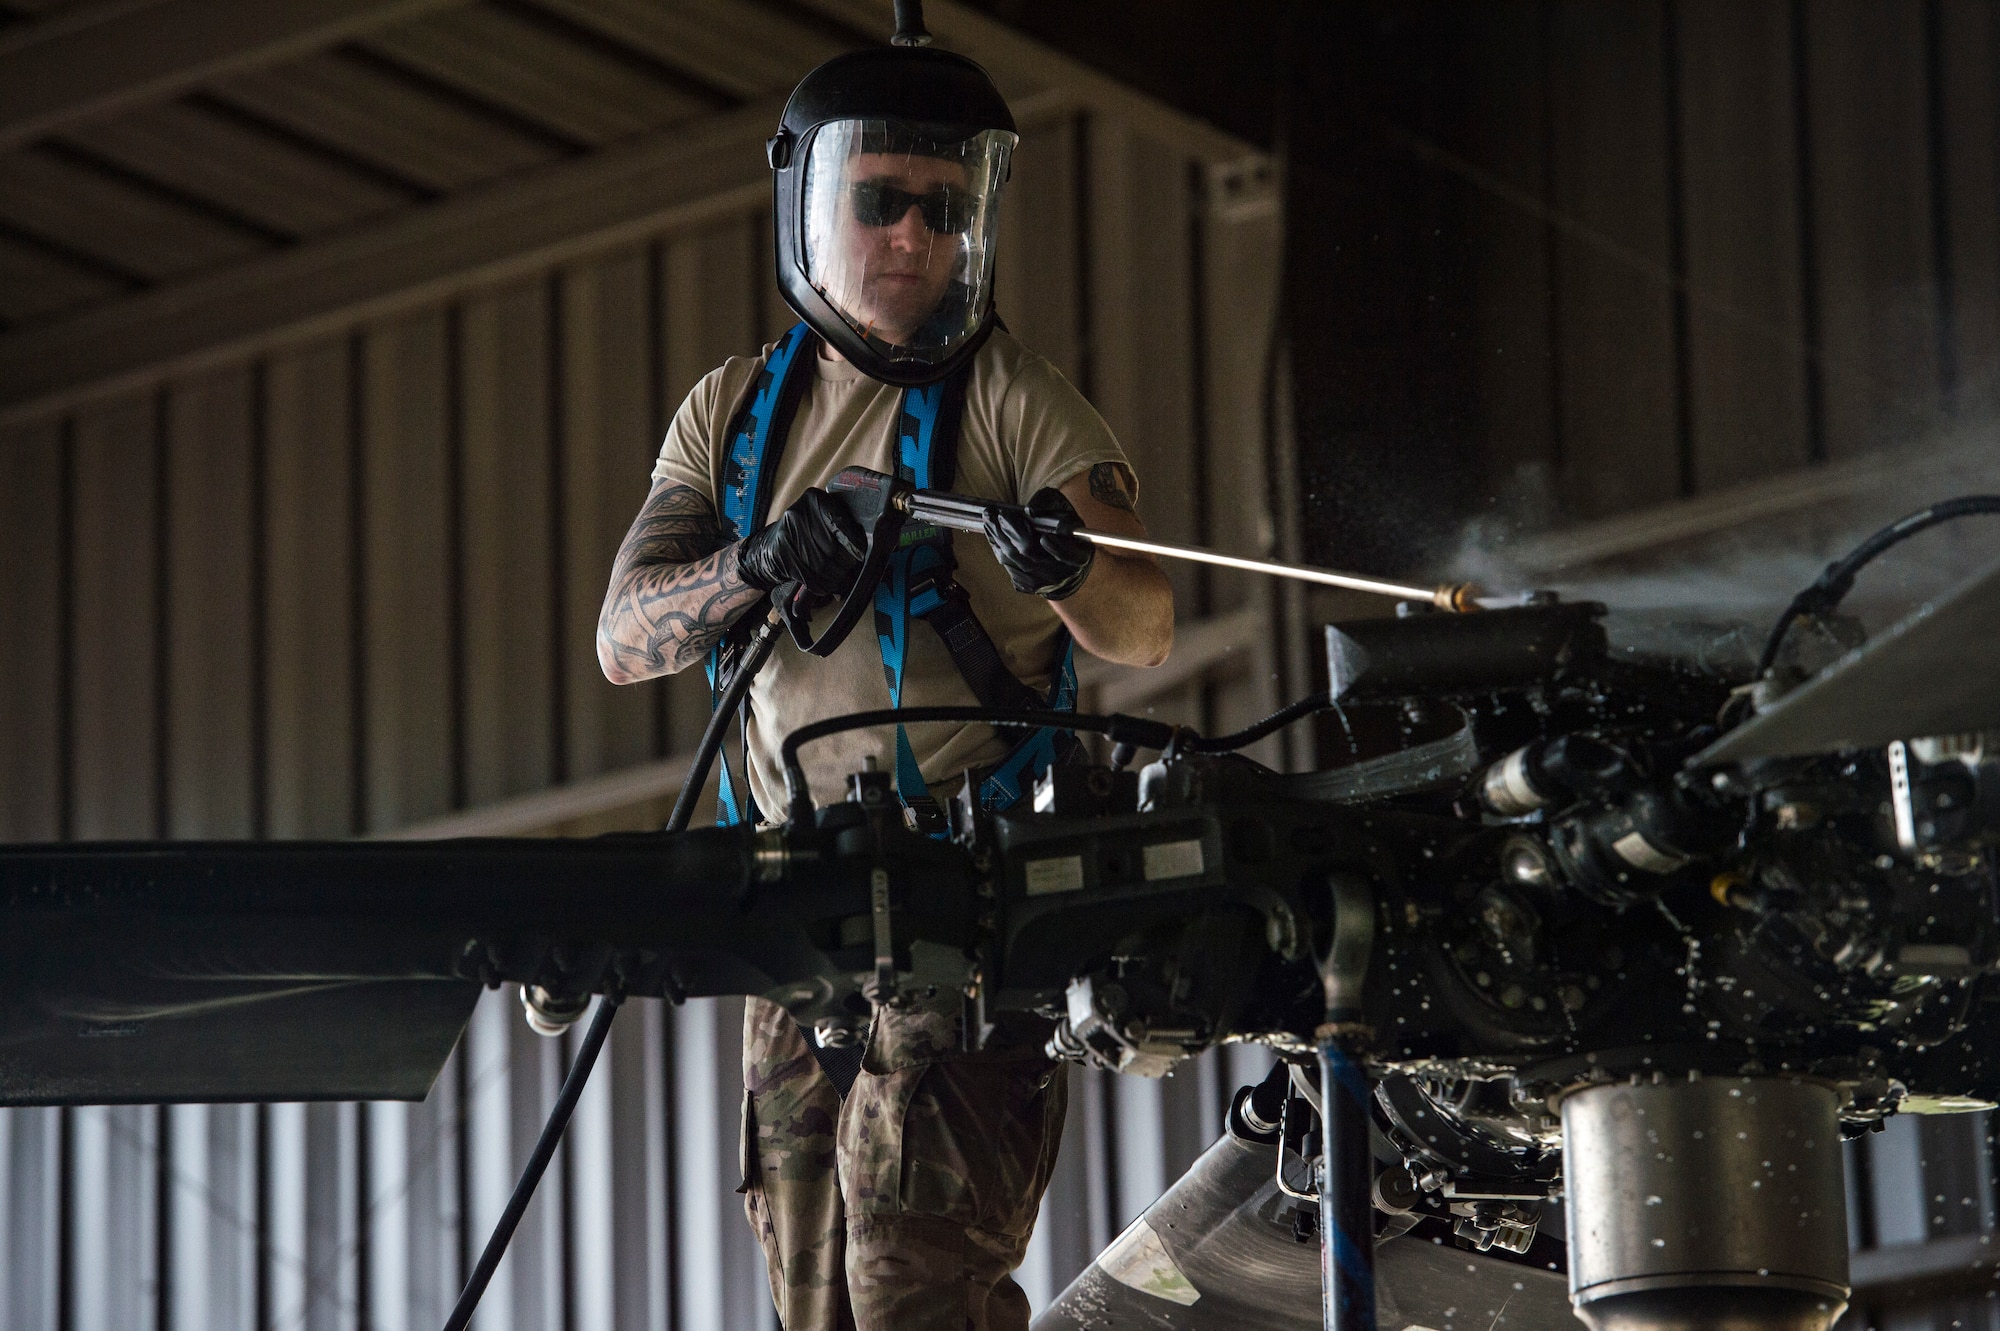 Senior Airman Matthew Bendall, 41st Helicopter Maintenance Unit communication and navigation journeyman, sprays the top of an HH-60G Pave Hawk, Feb. 22, 2018, at Moody Air Force Base, Ga. Airmen are required to wash the helicopters every 180 days to control corrosion caused by oil, dirt and grime. Washing paired with mechanical and electrical maintenance help Airmen ensure the Pave Hawks are ready at a moment’s notice. (U.S. Air Force photo by Senior Airman Janiqua P. Robinson)